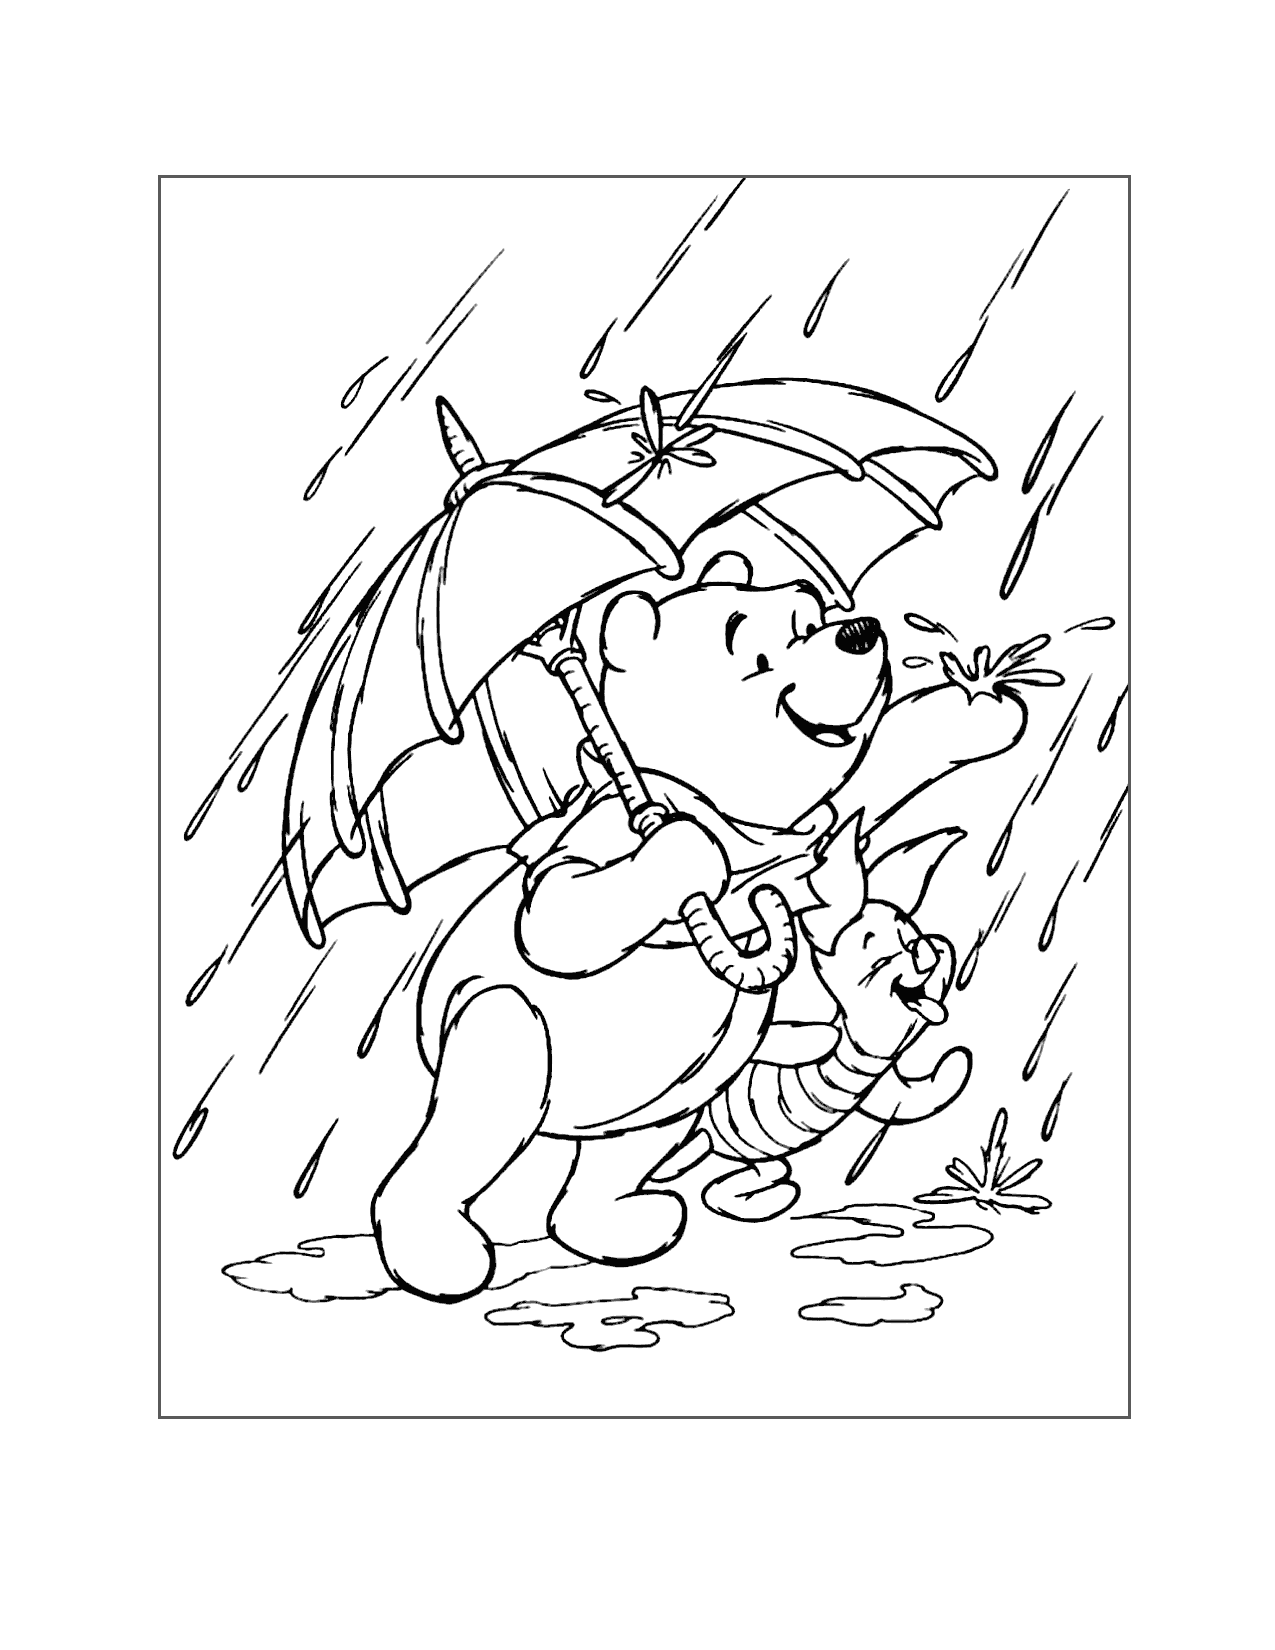 Pooh And Piglet In The Rain Coloring Page